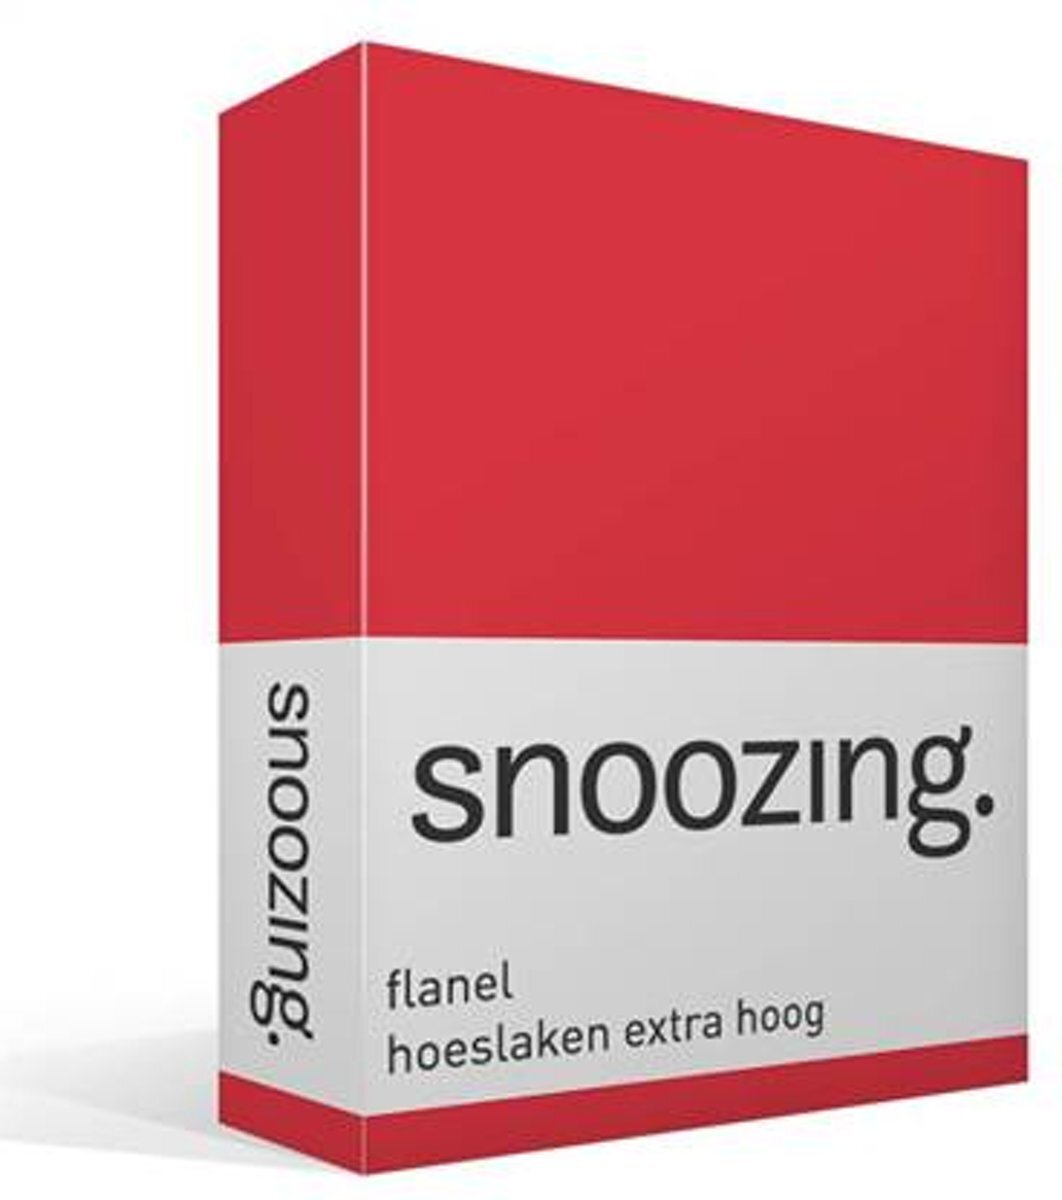 Snoozing flanel hoeslaken extra hoog - 1-persoons (90/100x220 cm) -